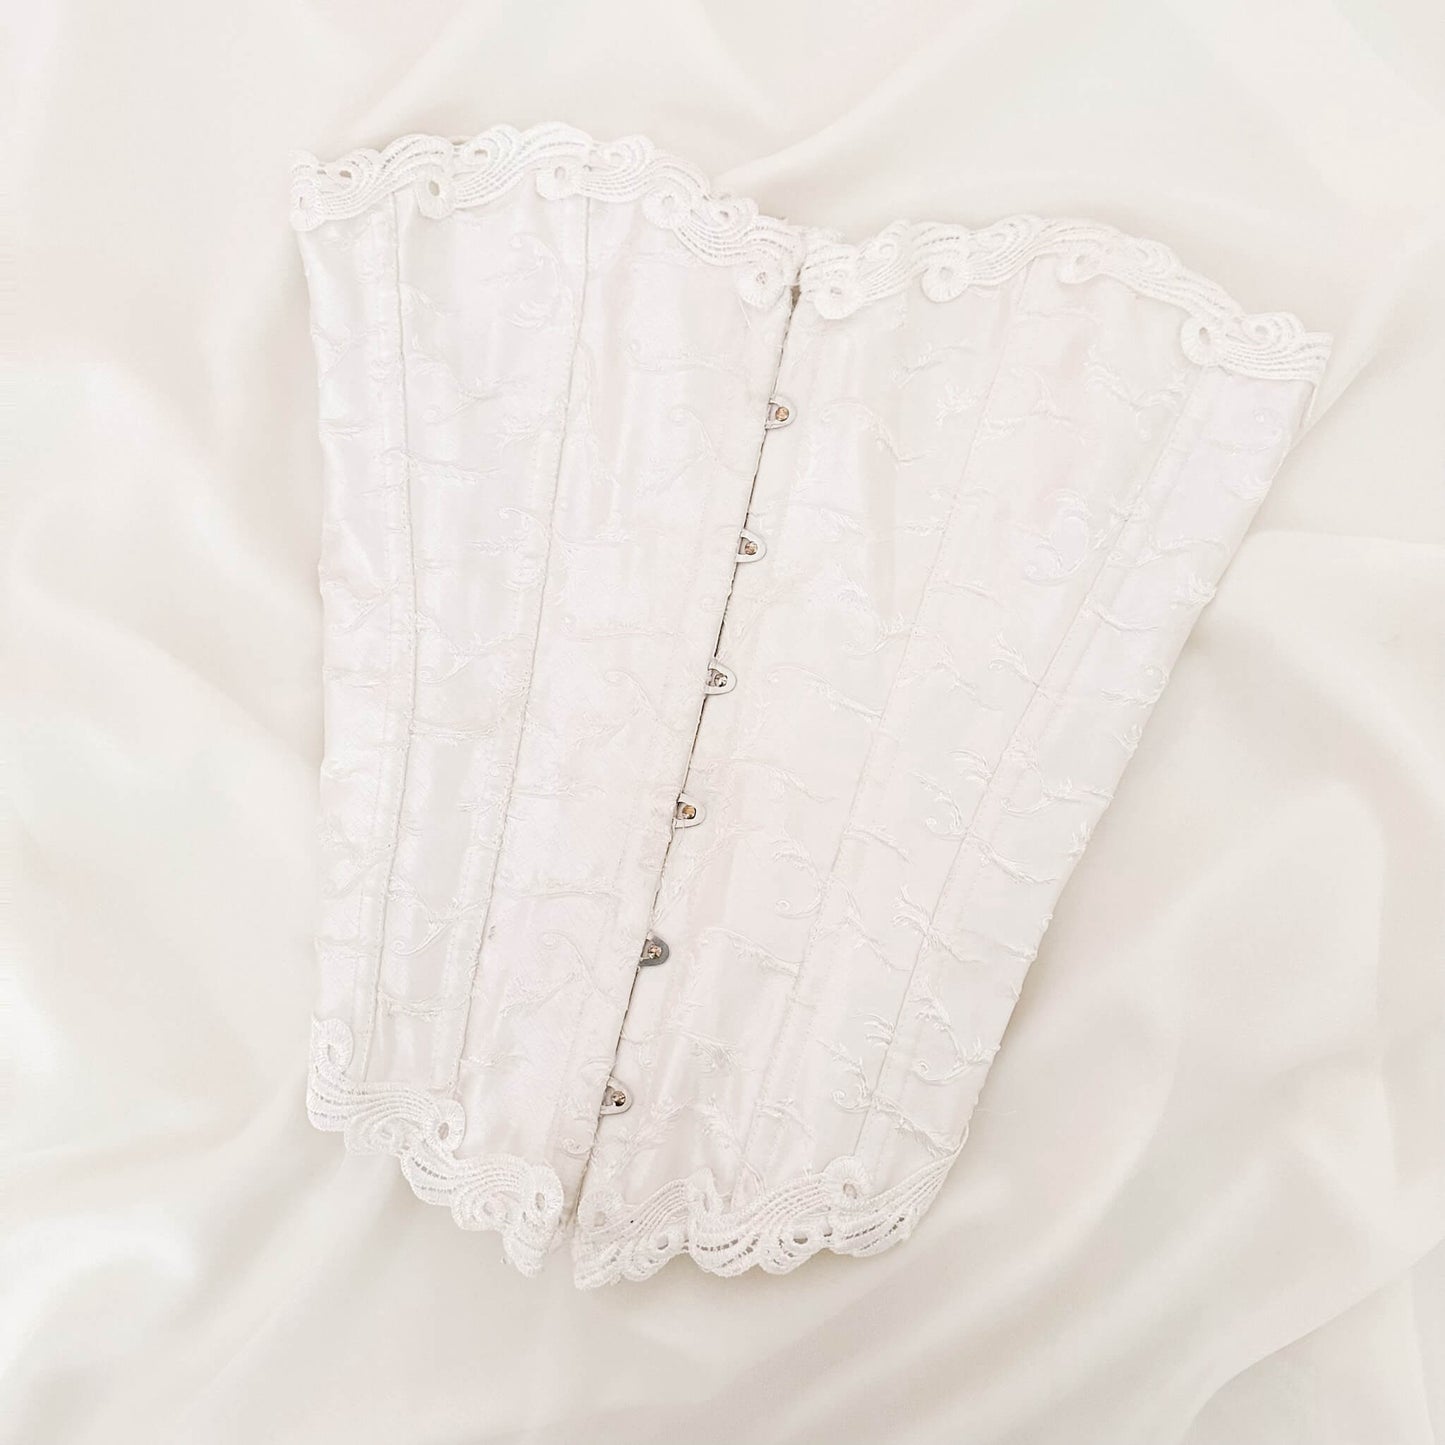 FOH WHITE IVORY LACE CORSET (S - M)